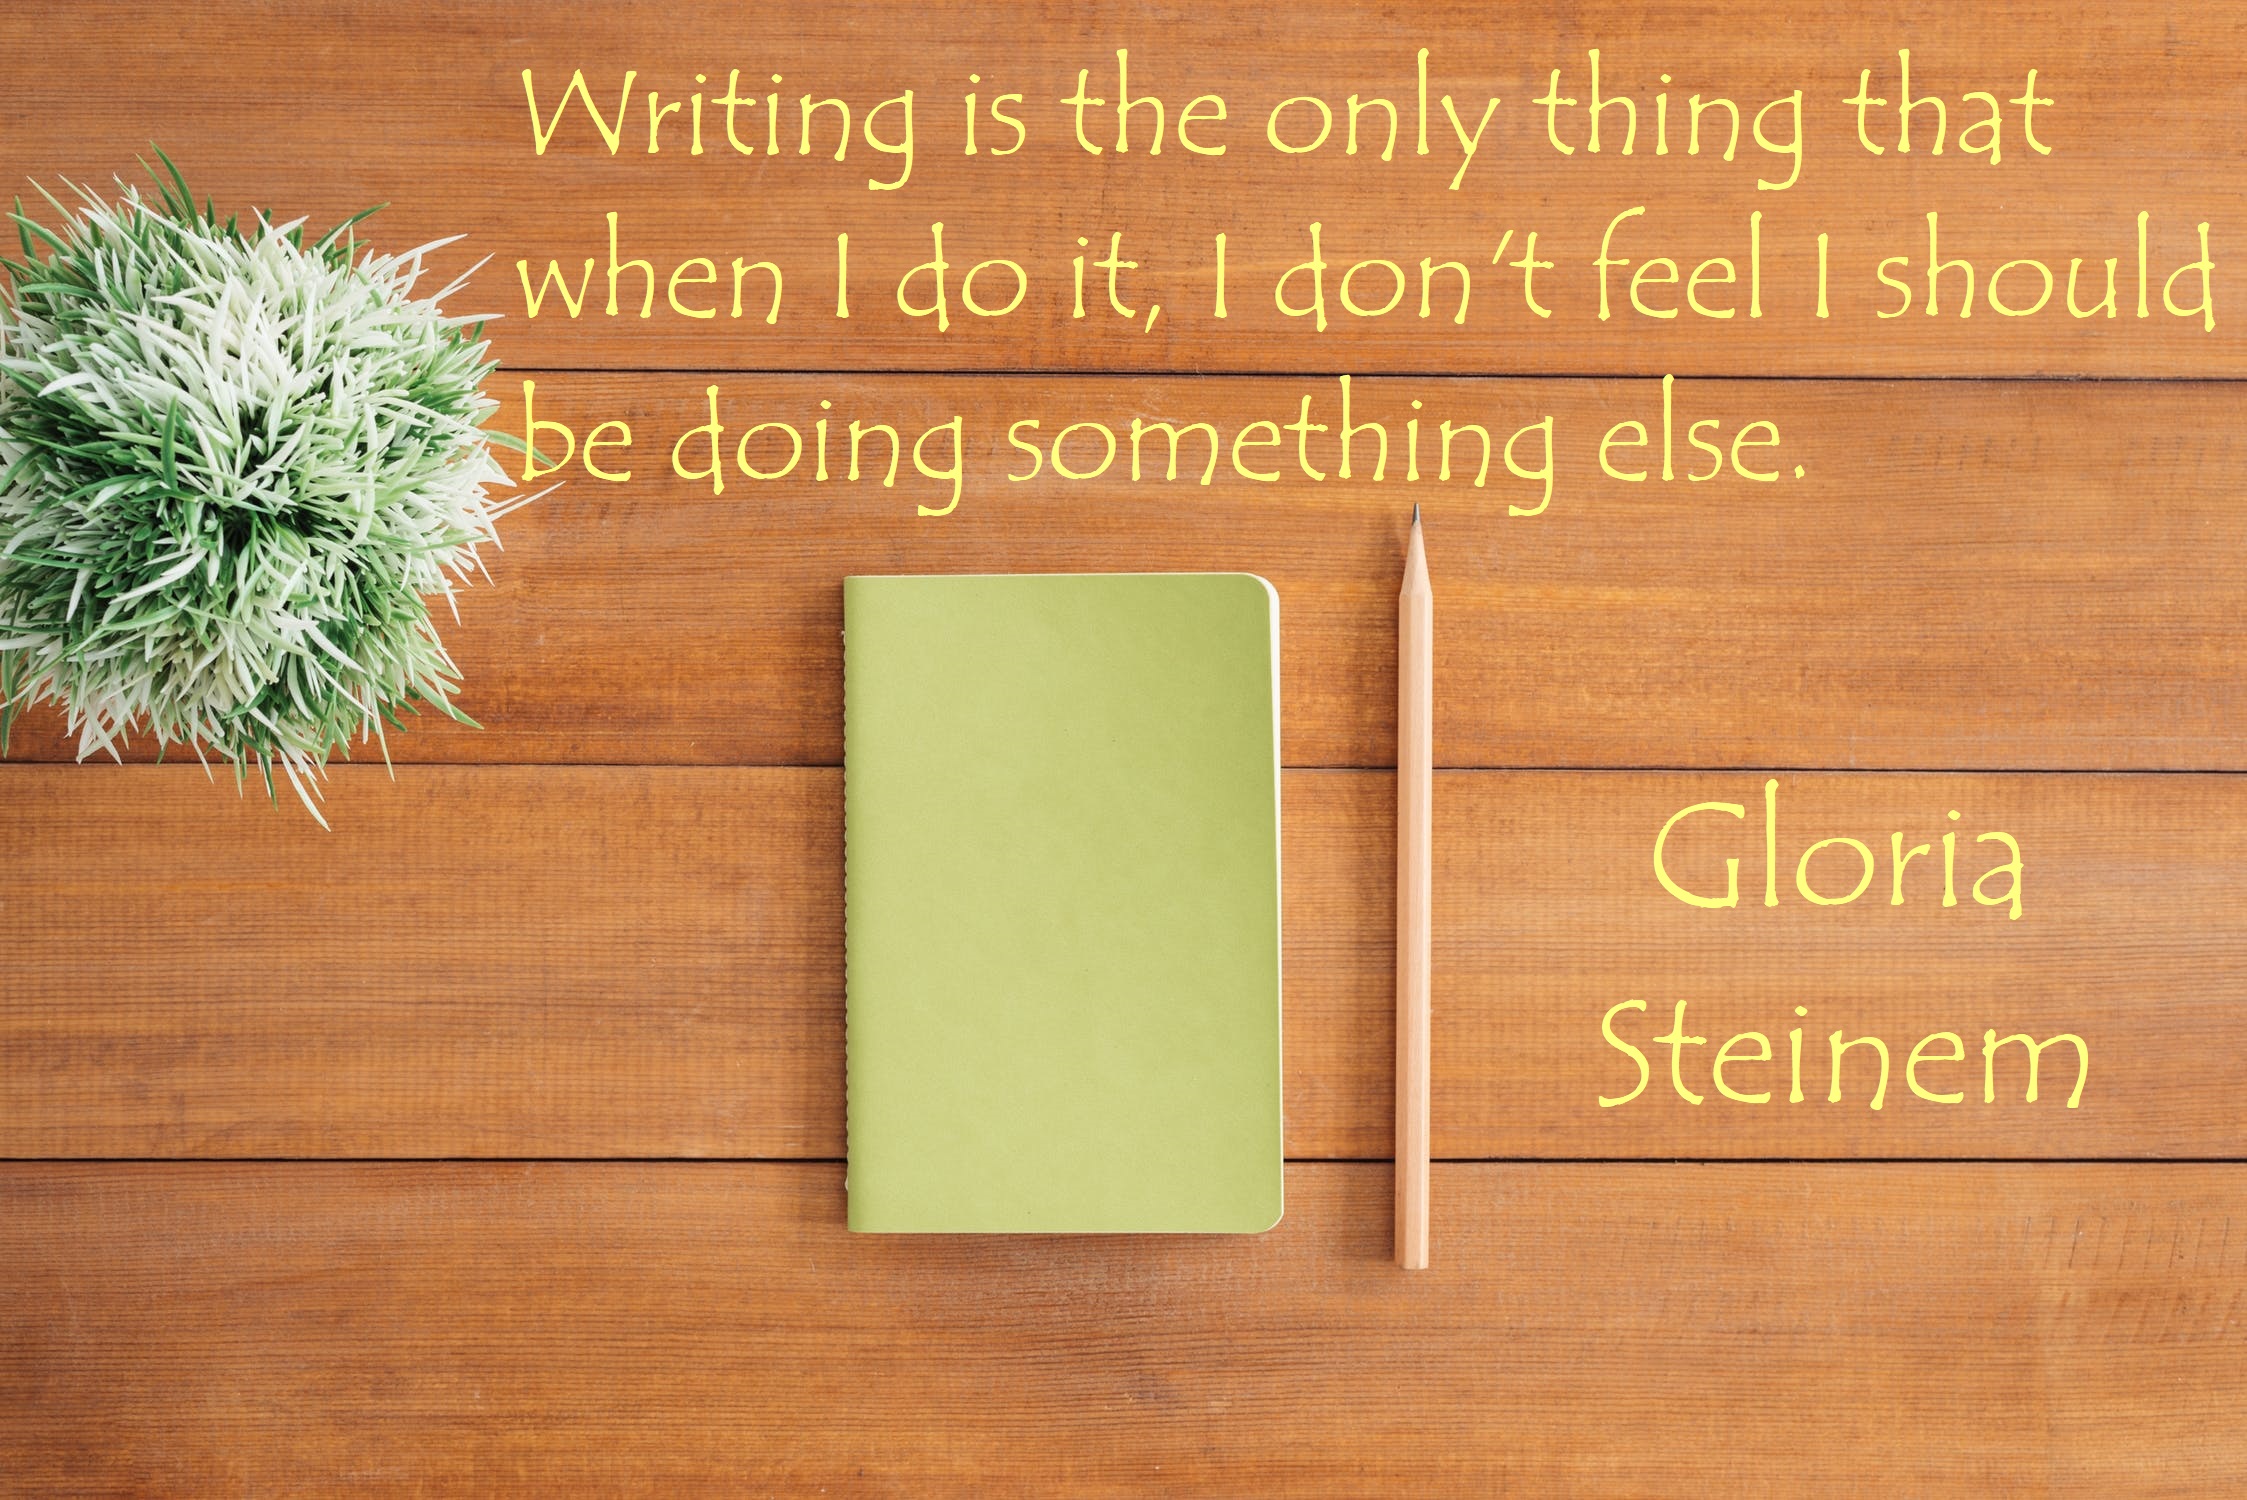 Writing is the only thing that, when I do it, I don’t feel like I should be doing something else.